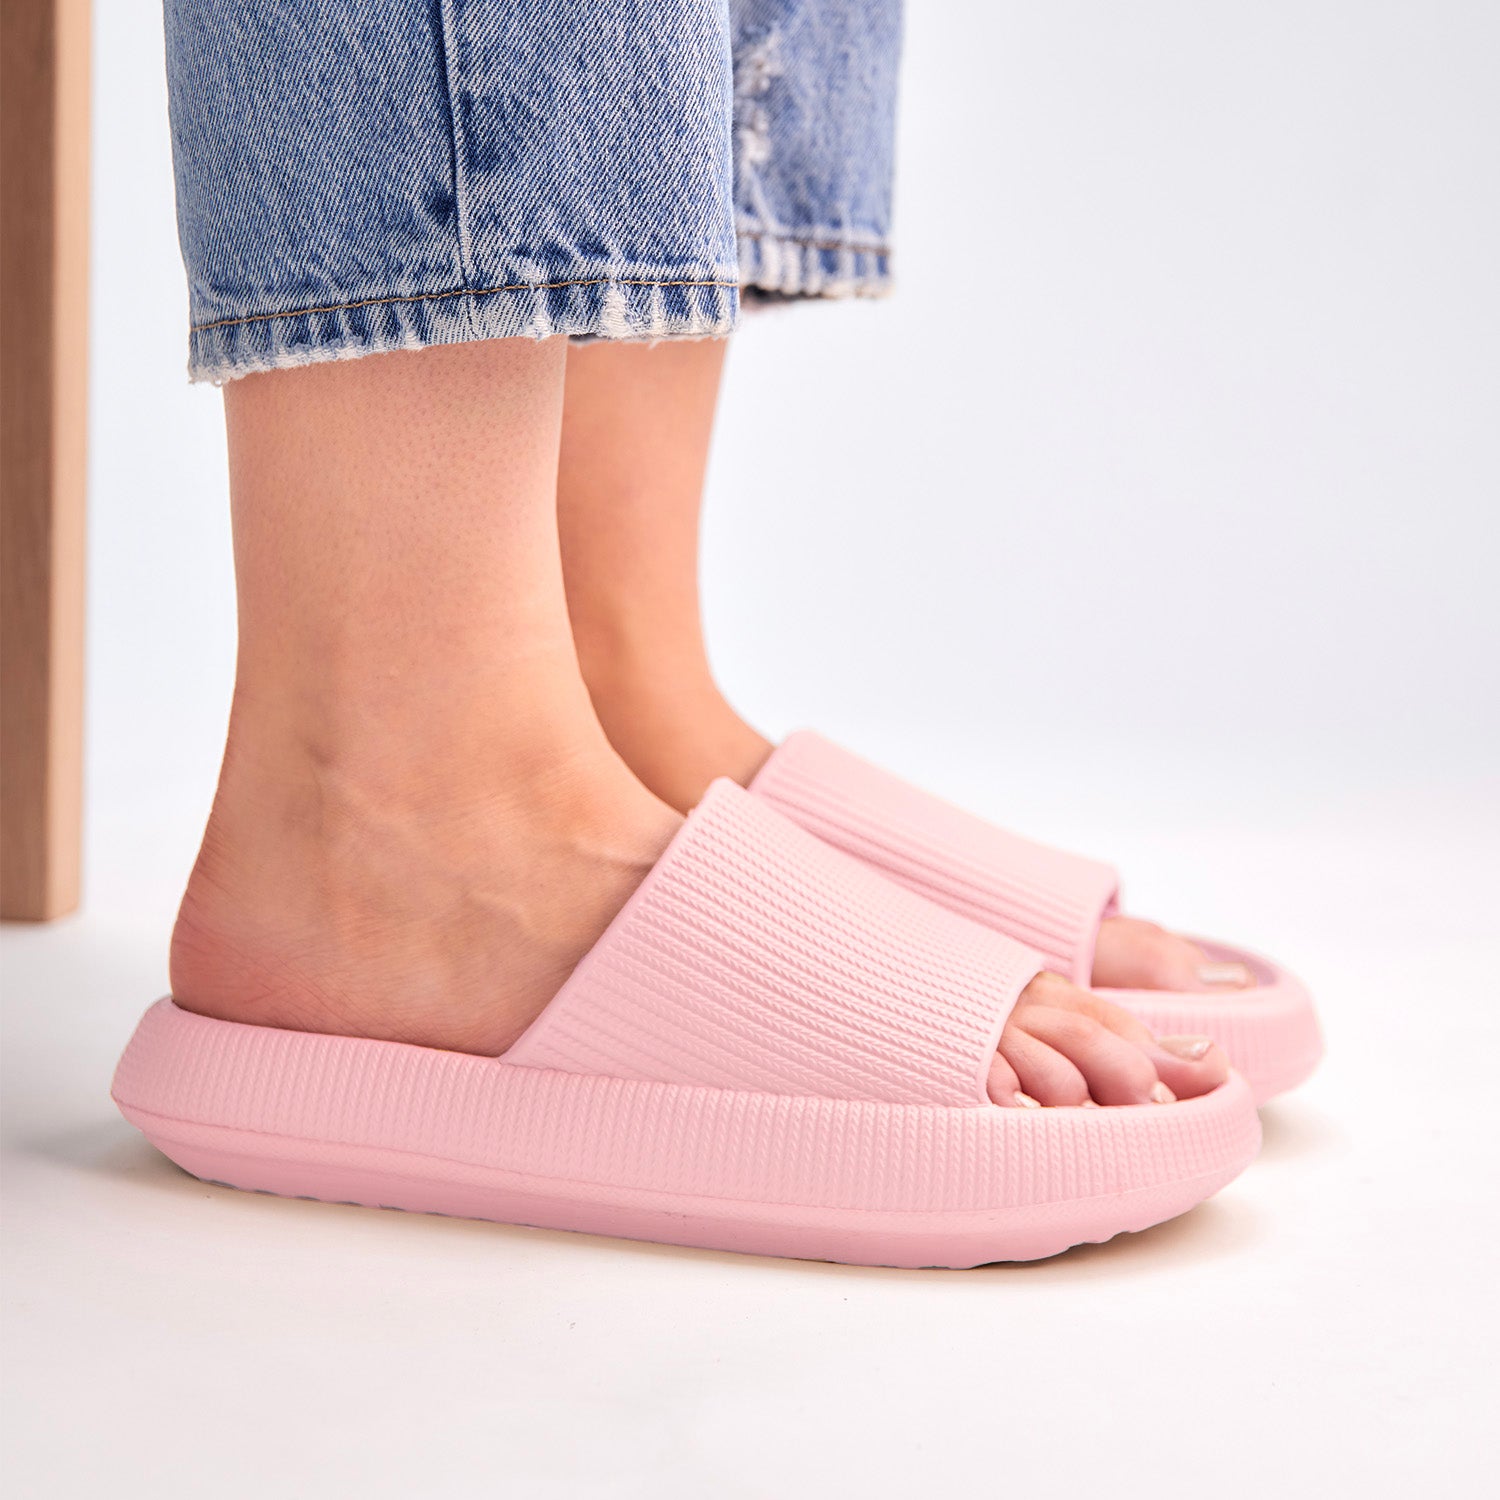 Comfy stylish pink slide-on slippers